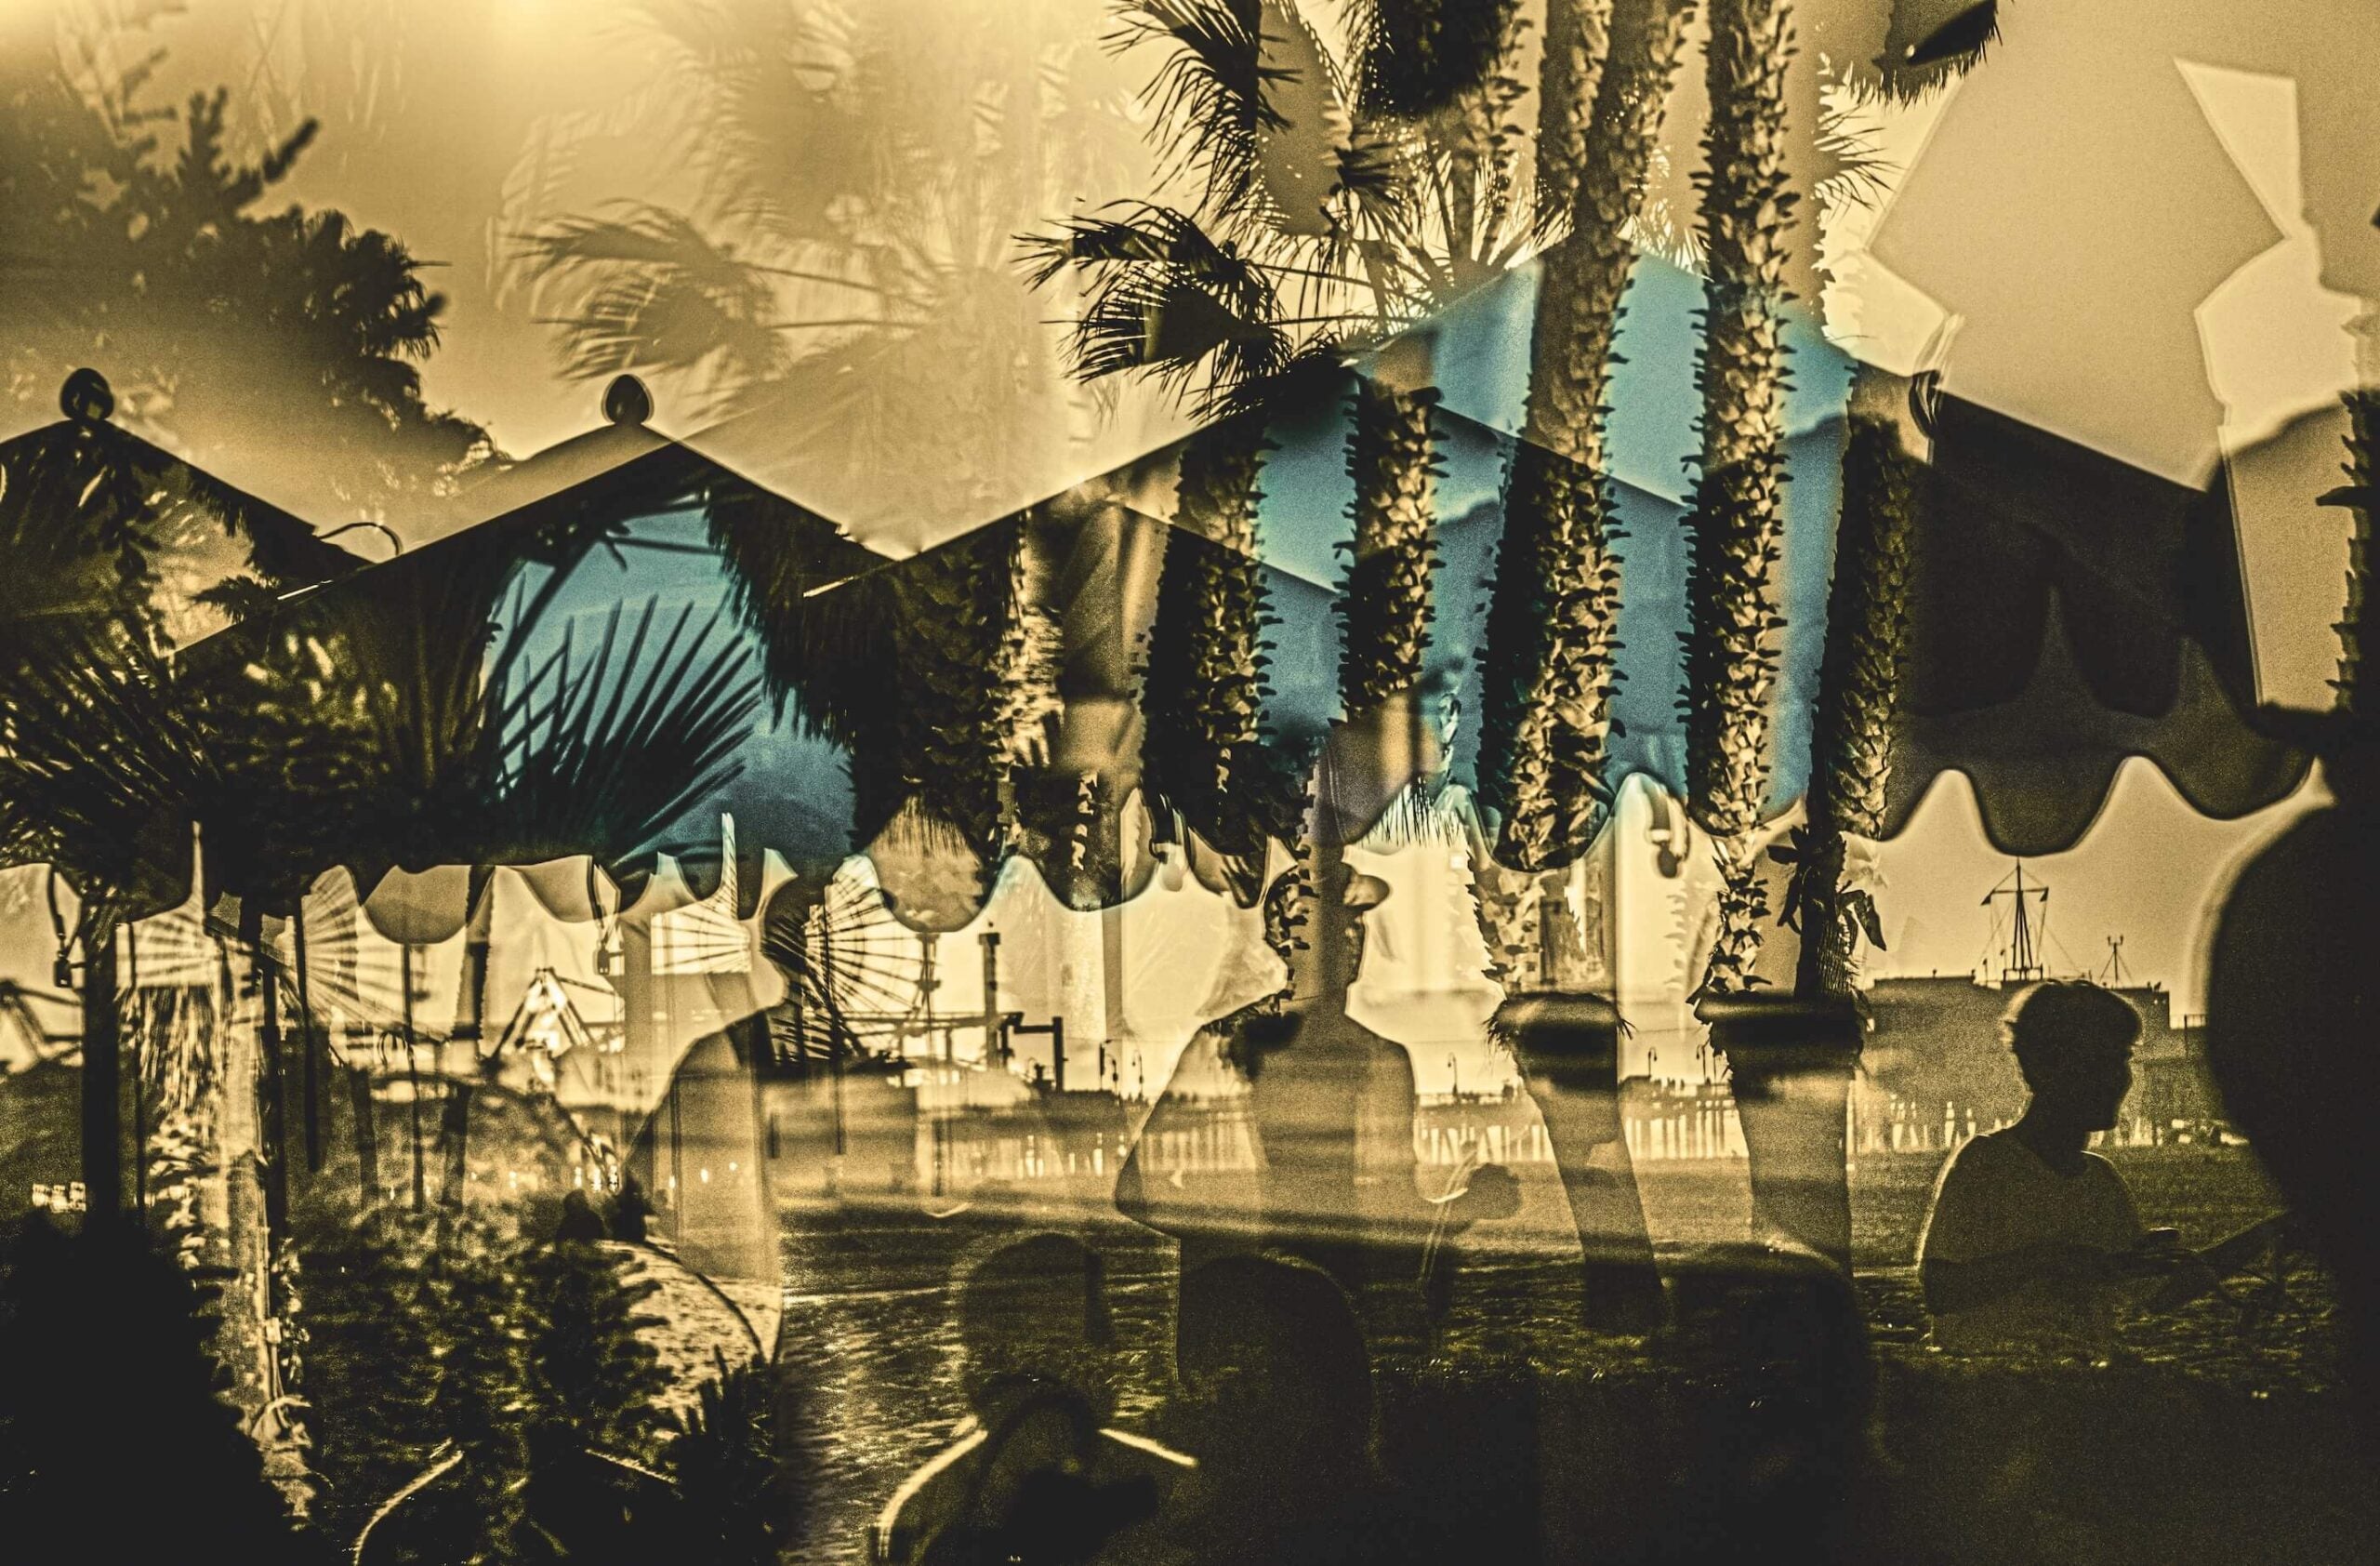 multiple exposure photograph of palm trees and blue umbrellas